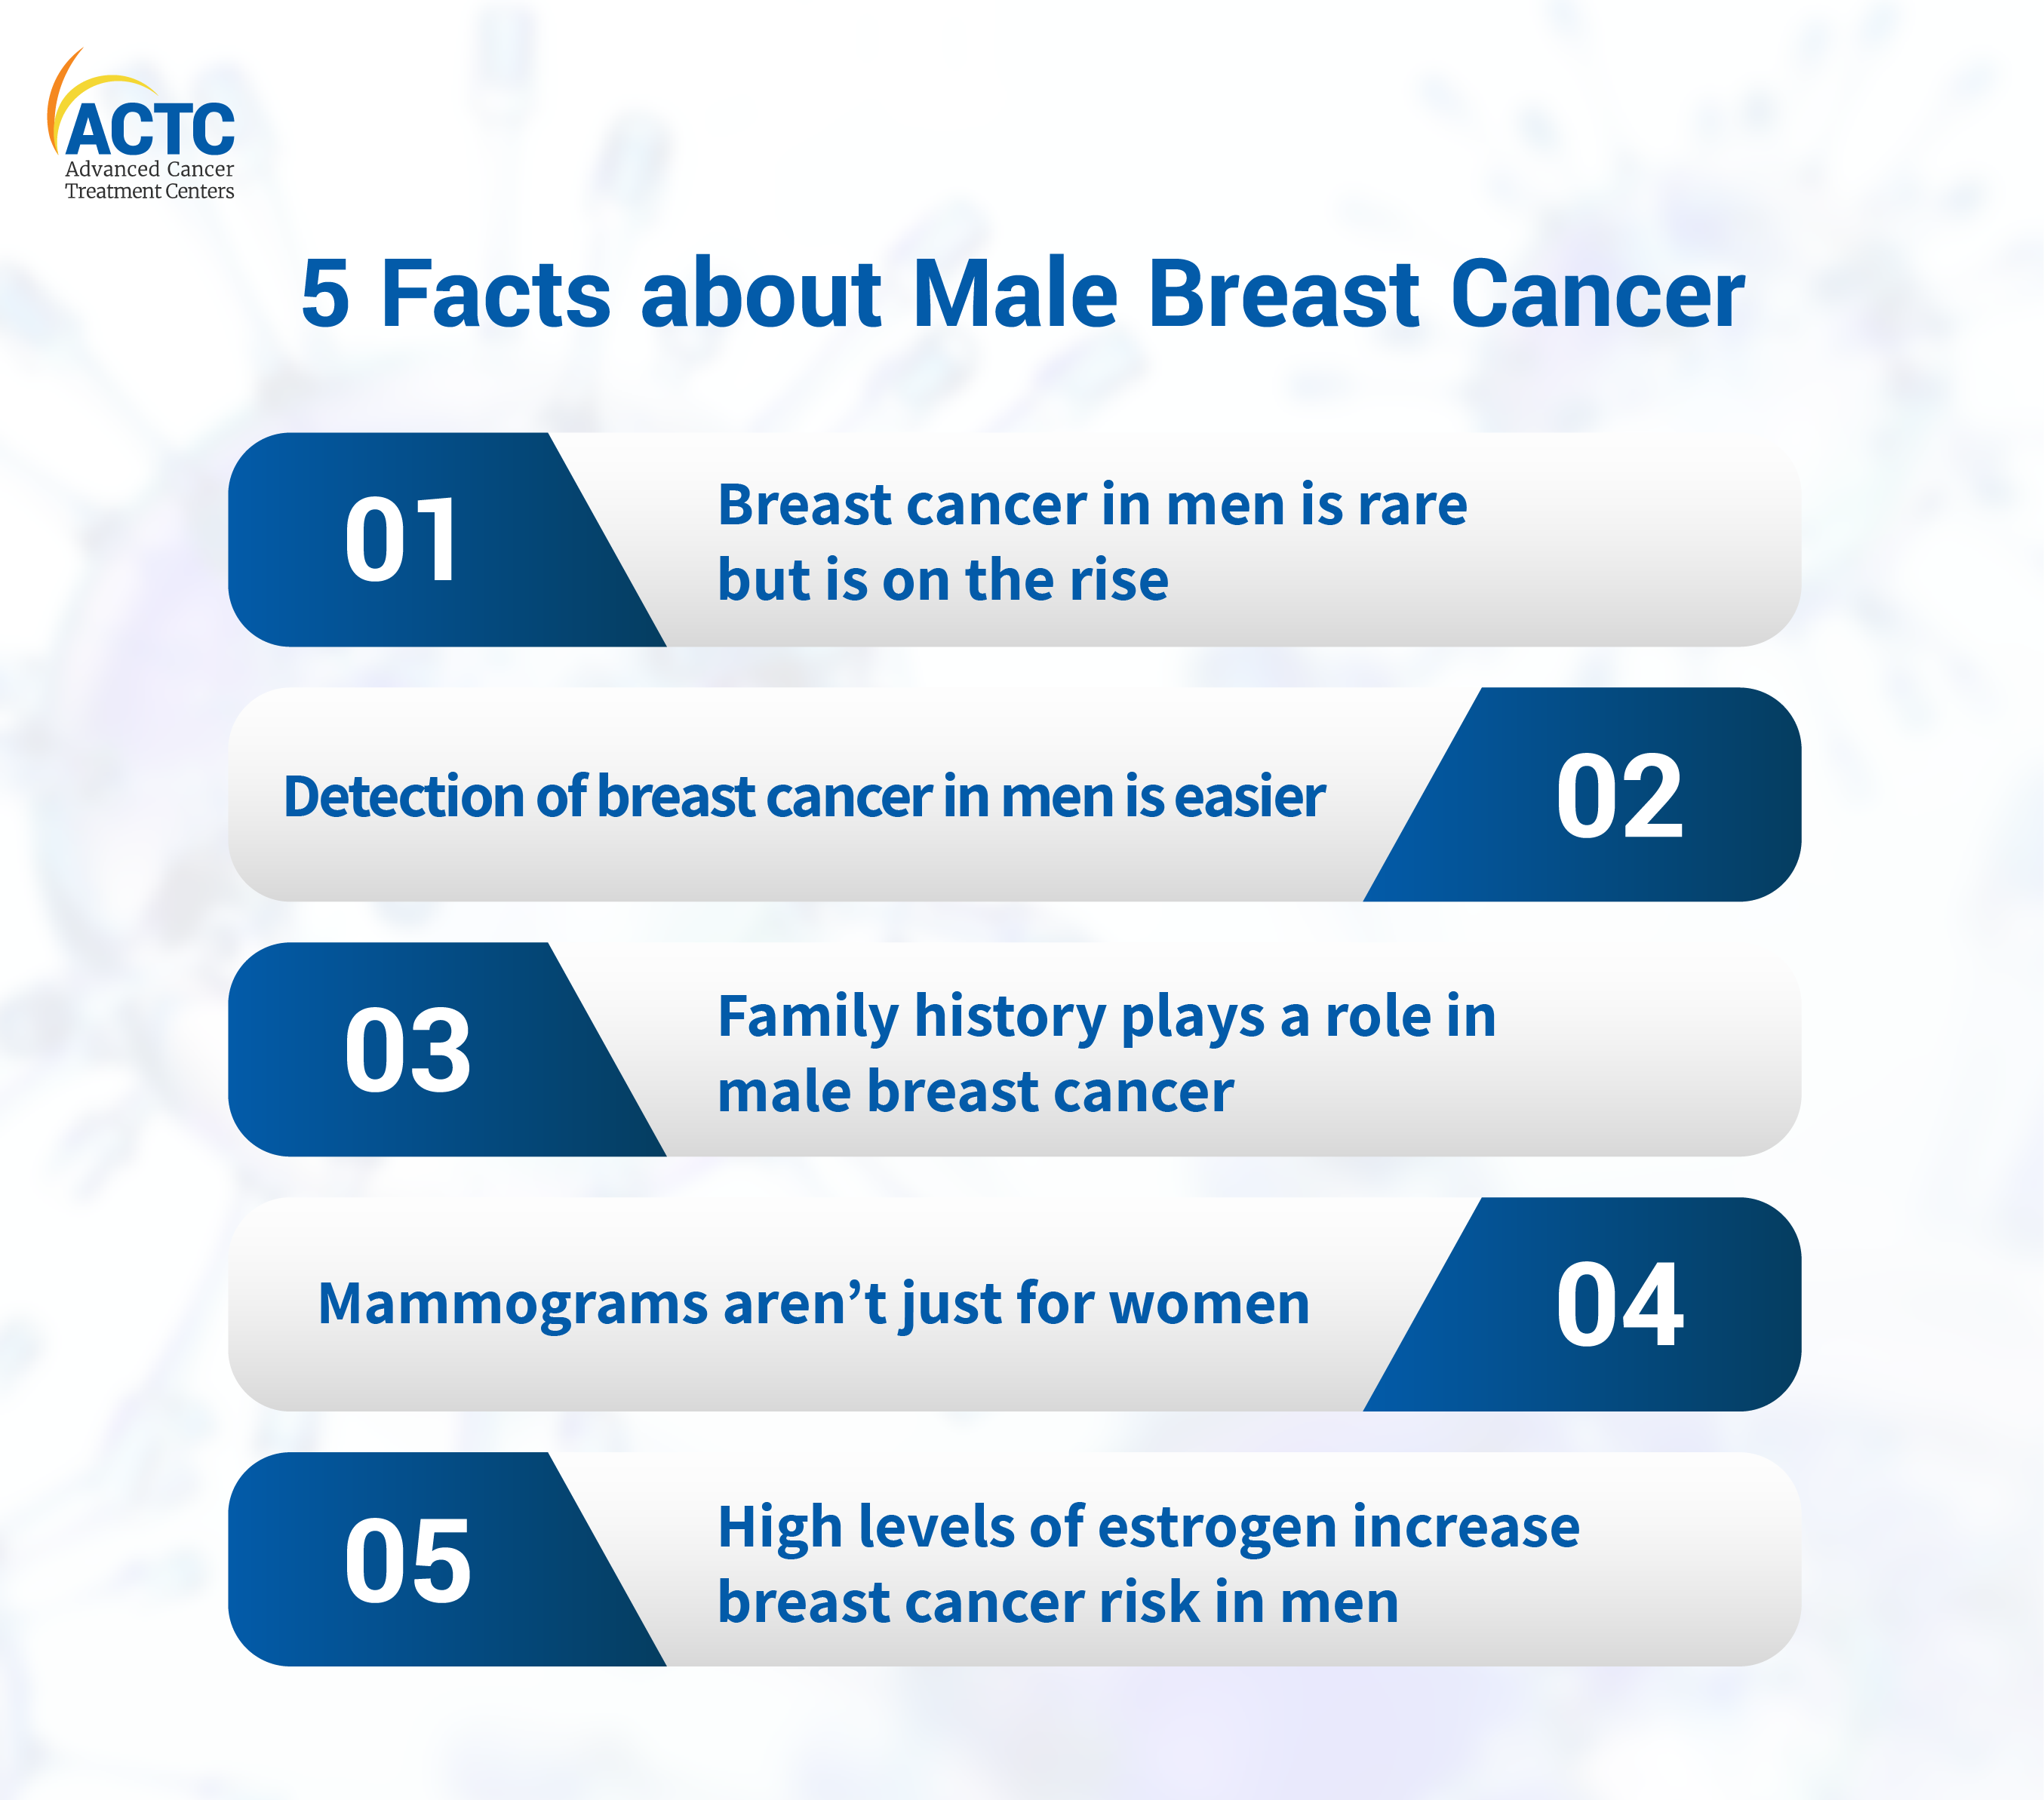 5 Facts about Male Breast Cancer